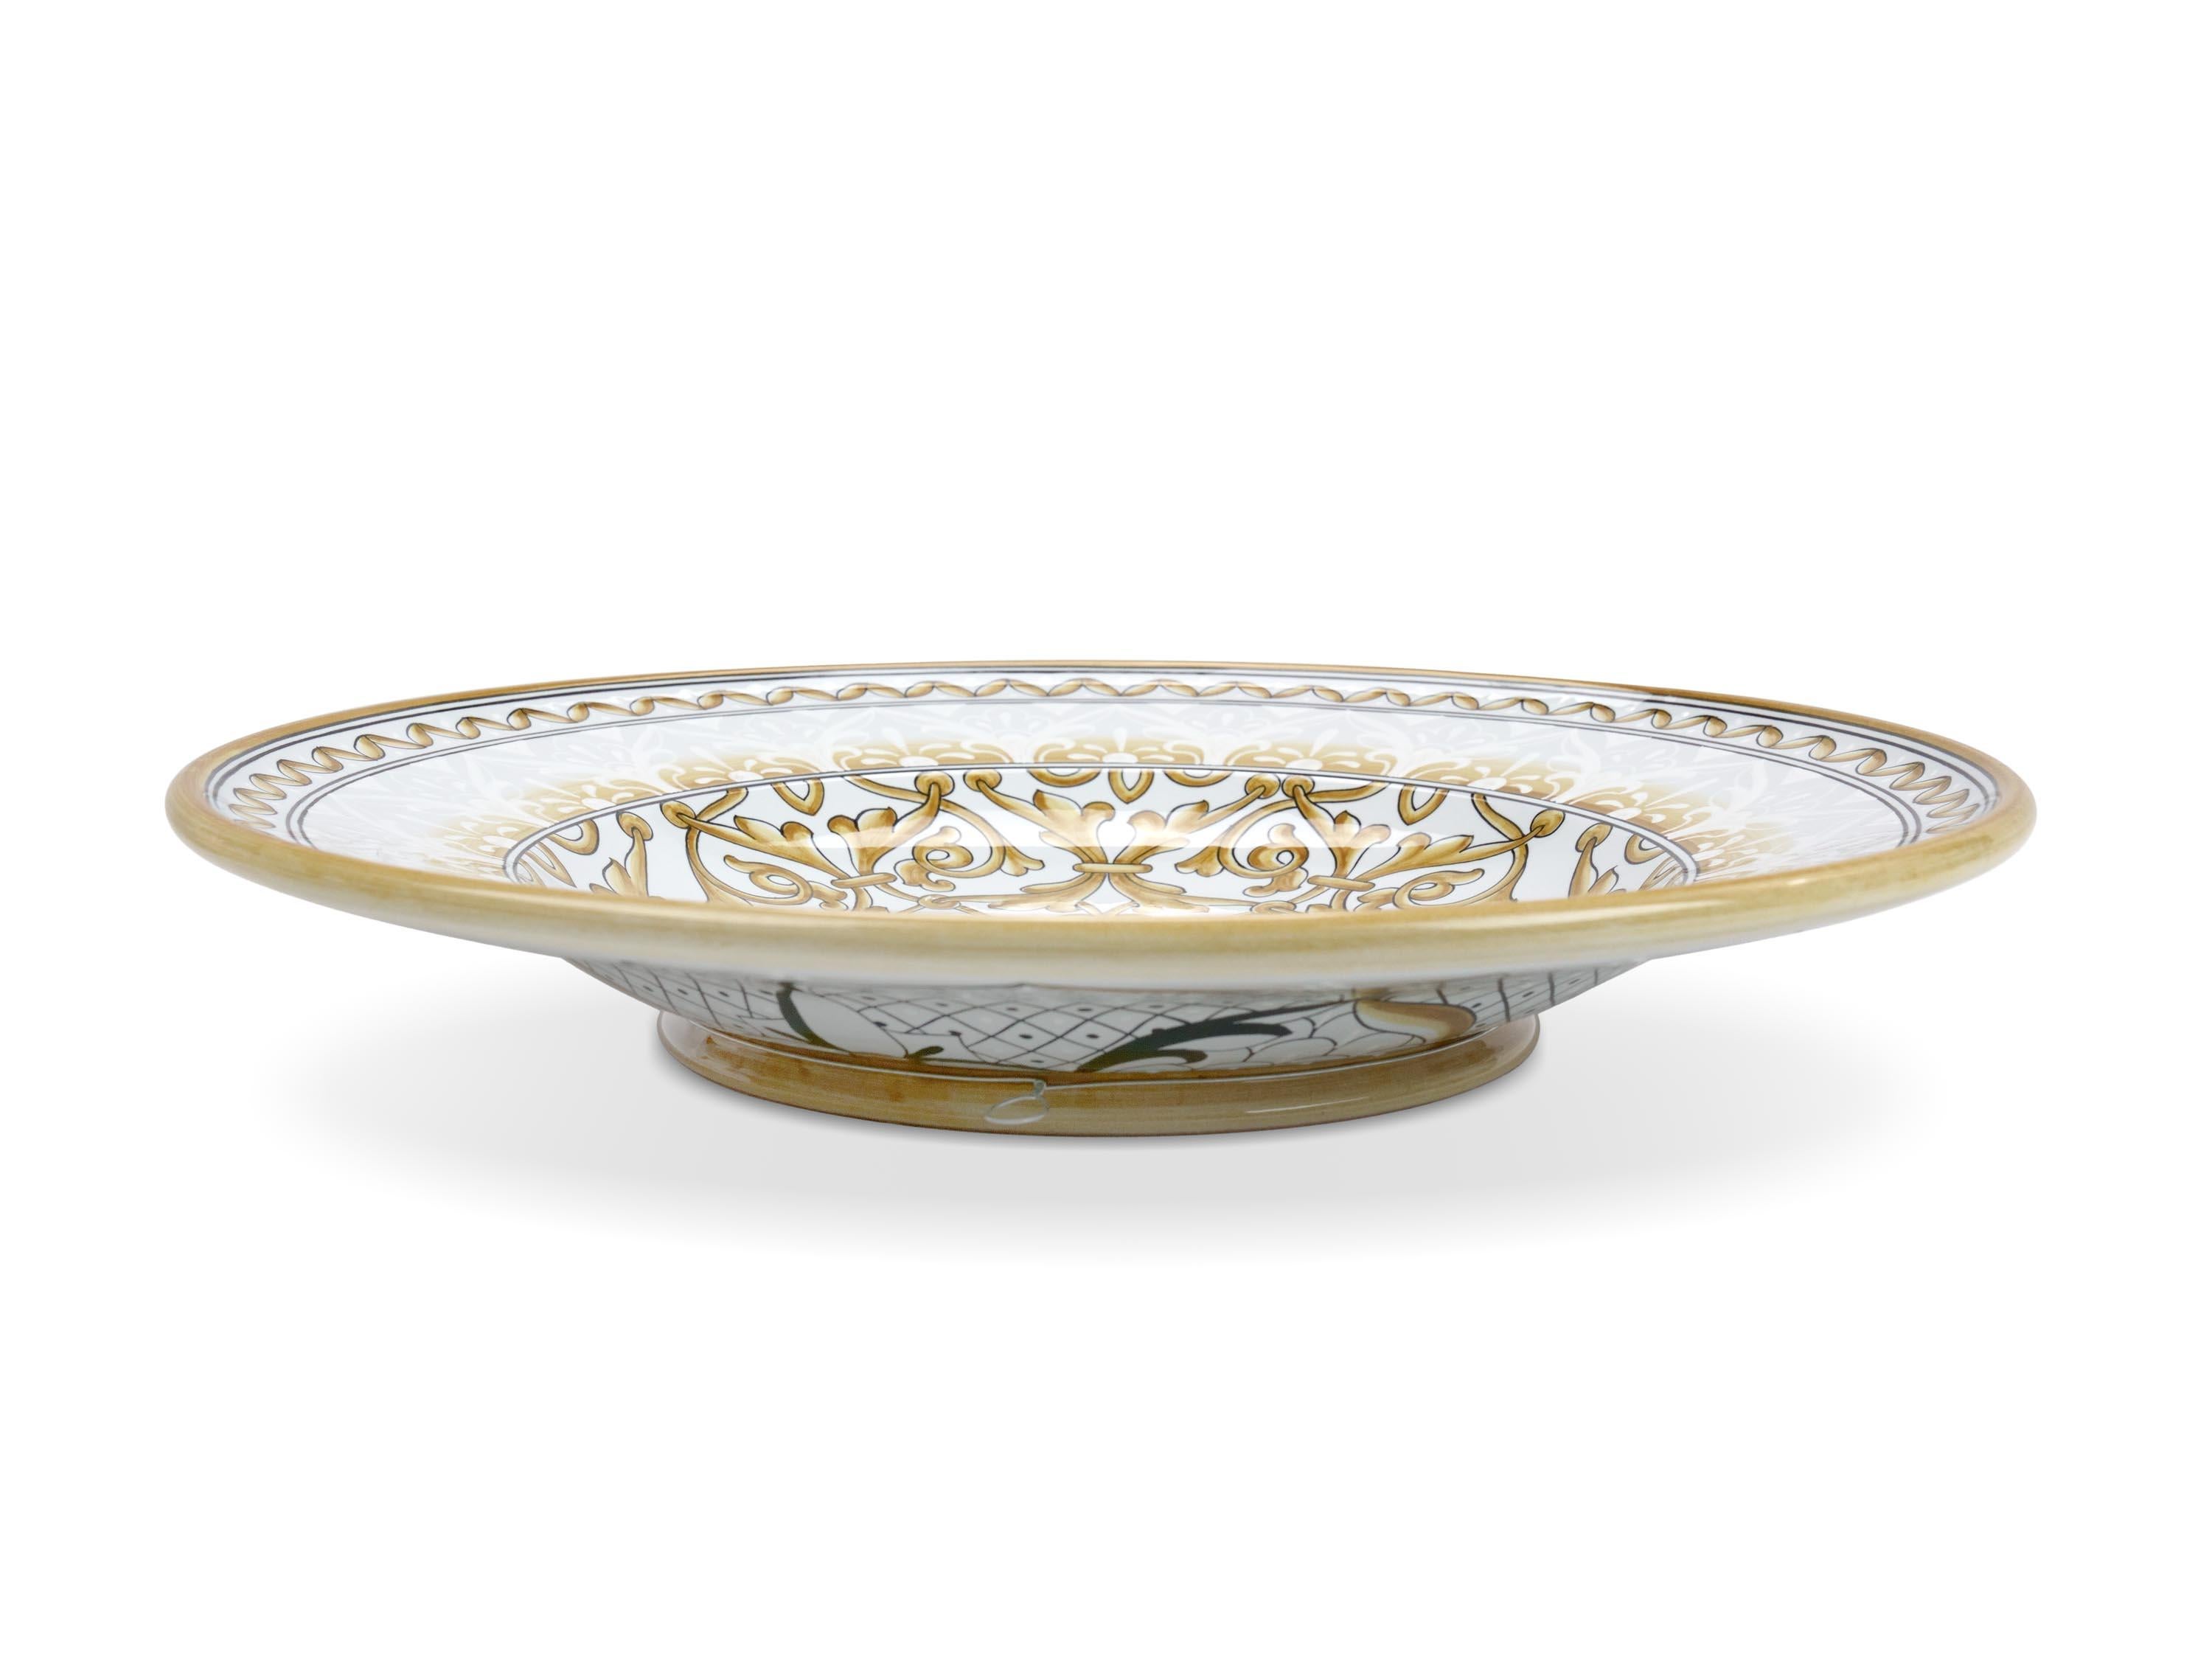 Contemporary Plate Centerpiece Tray Ornament Bowl Wall Dish Majolica White Decorated In Stock For Sale